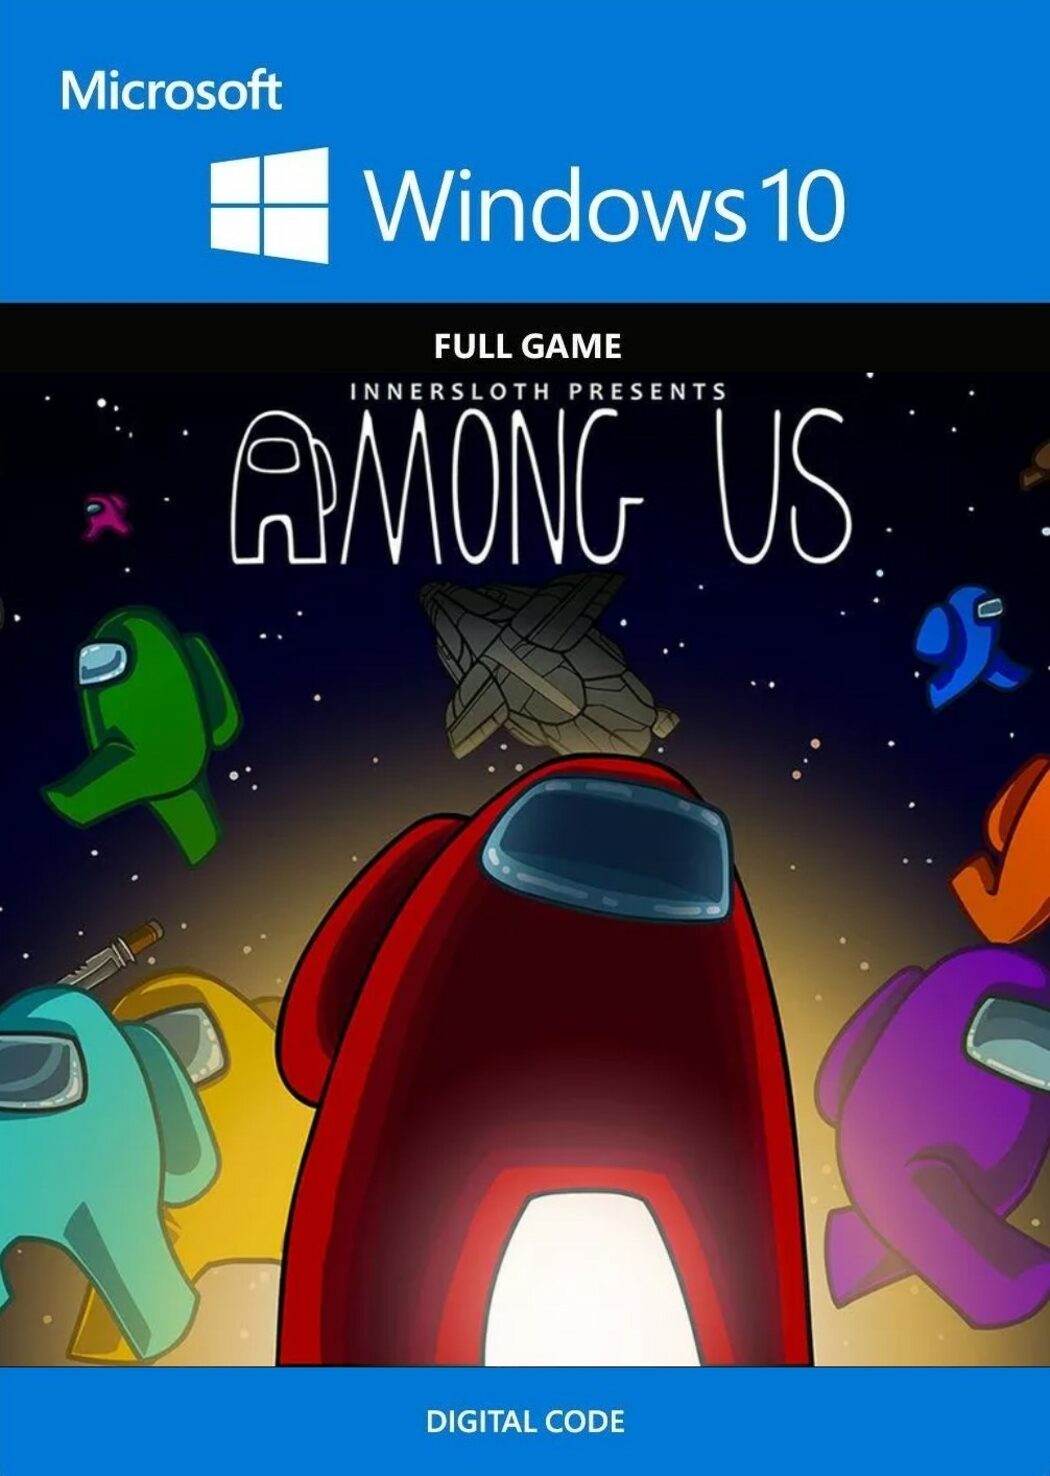 How to play Among Us on a Windows PC